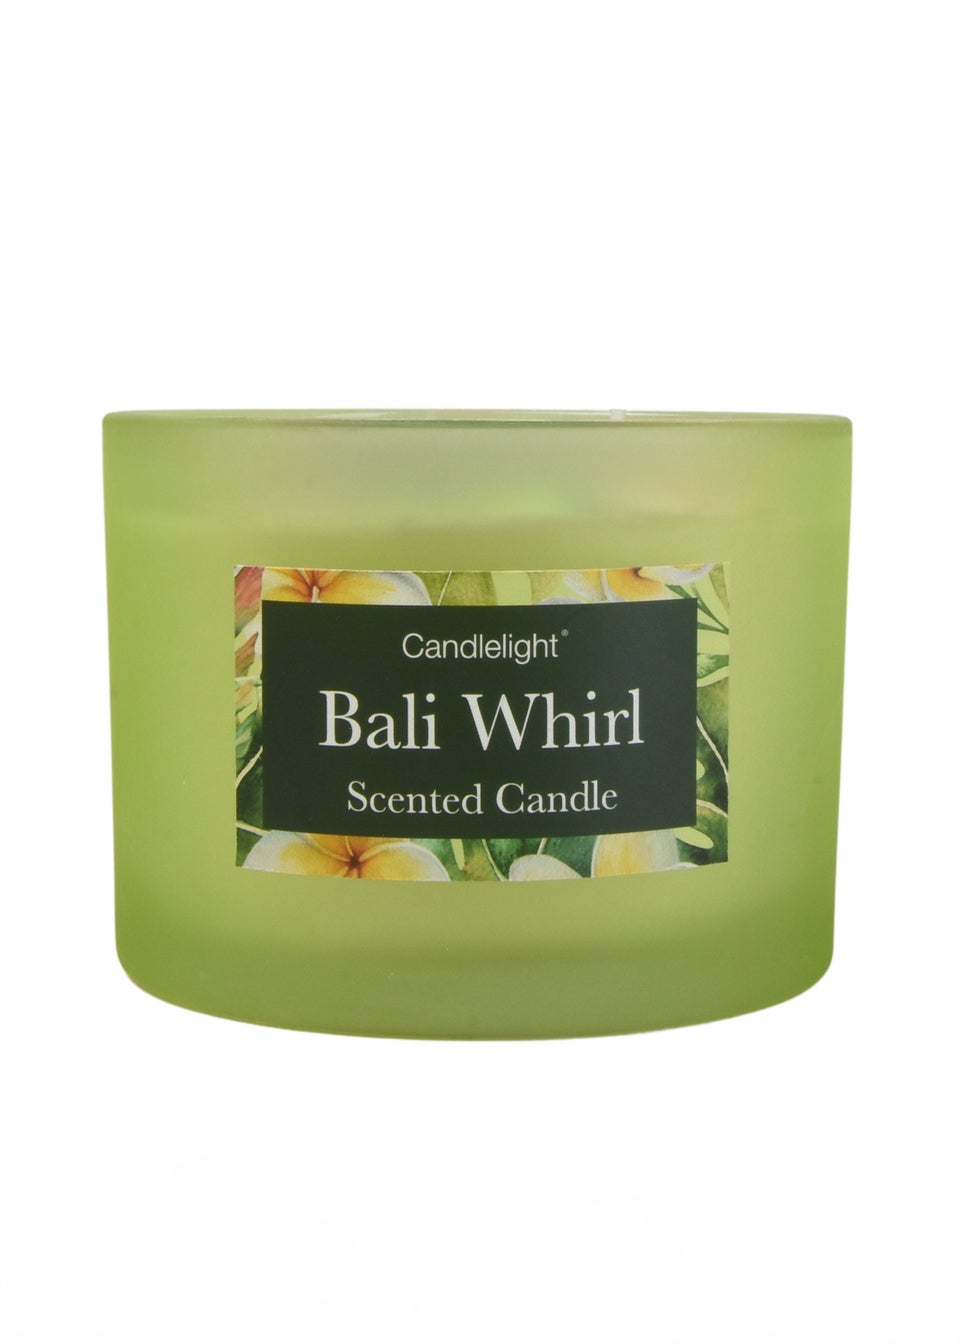 Candlelight Bali Whirl Scented Candle